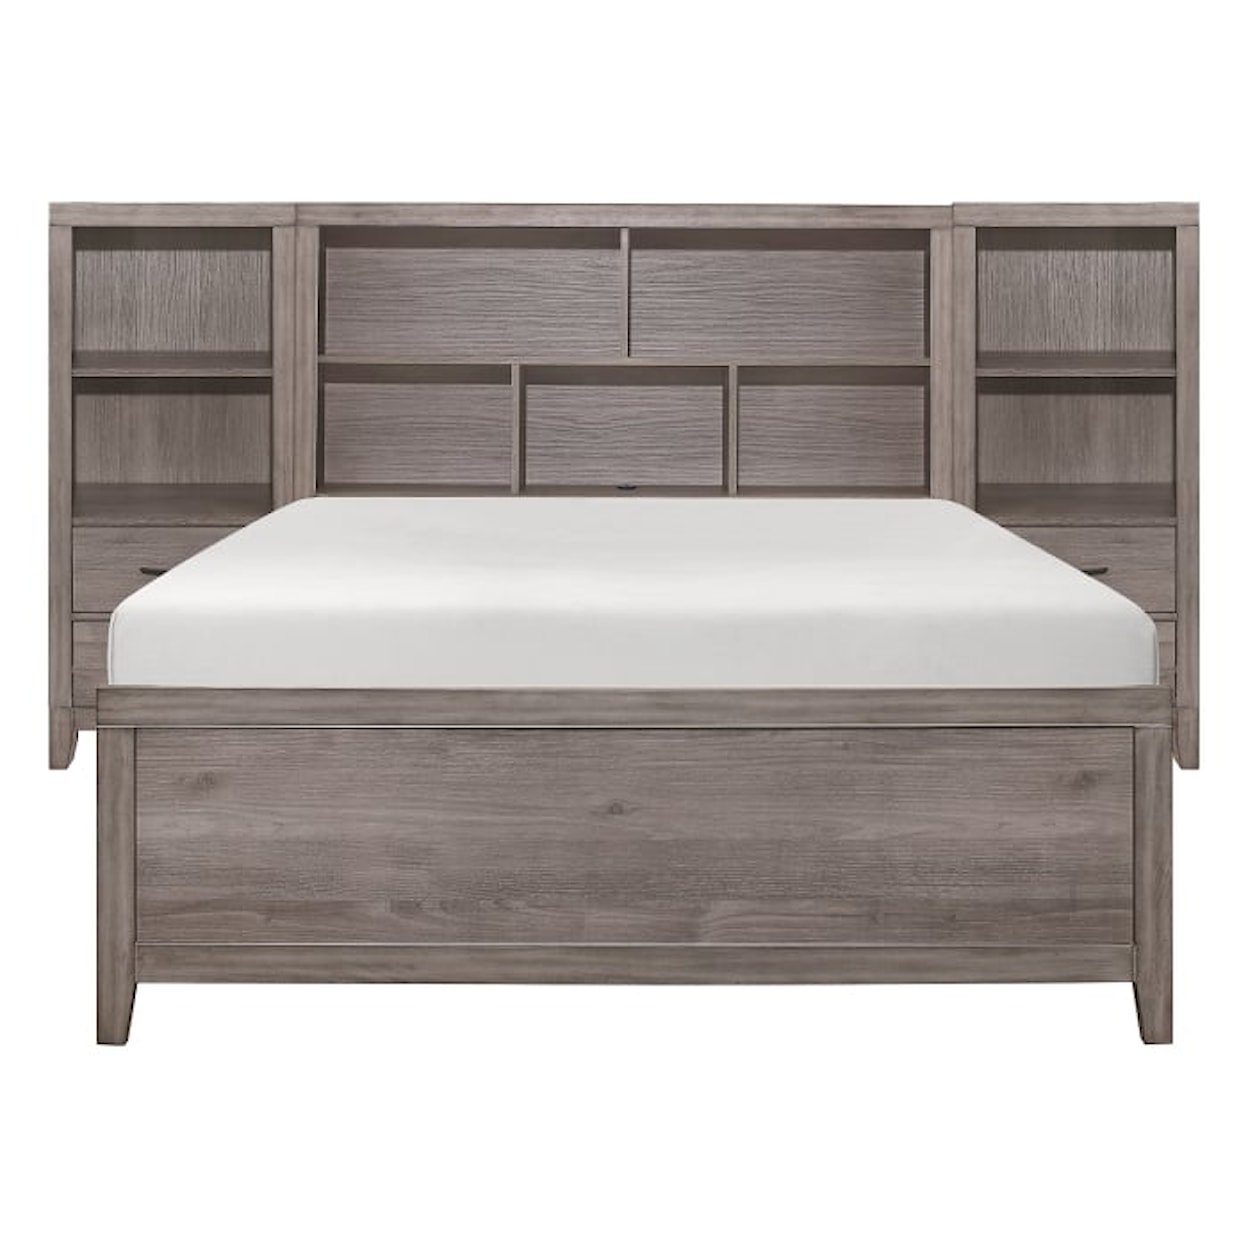 Homelegance Furniture Woodrow 3- Piece Full Wall Bed